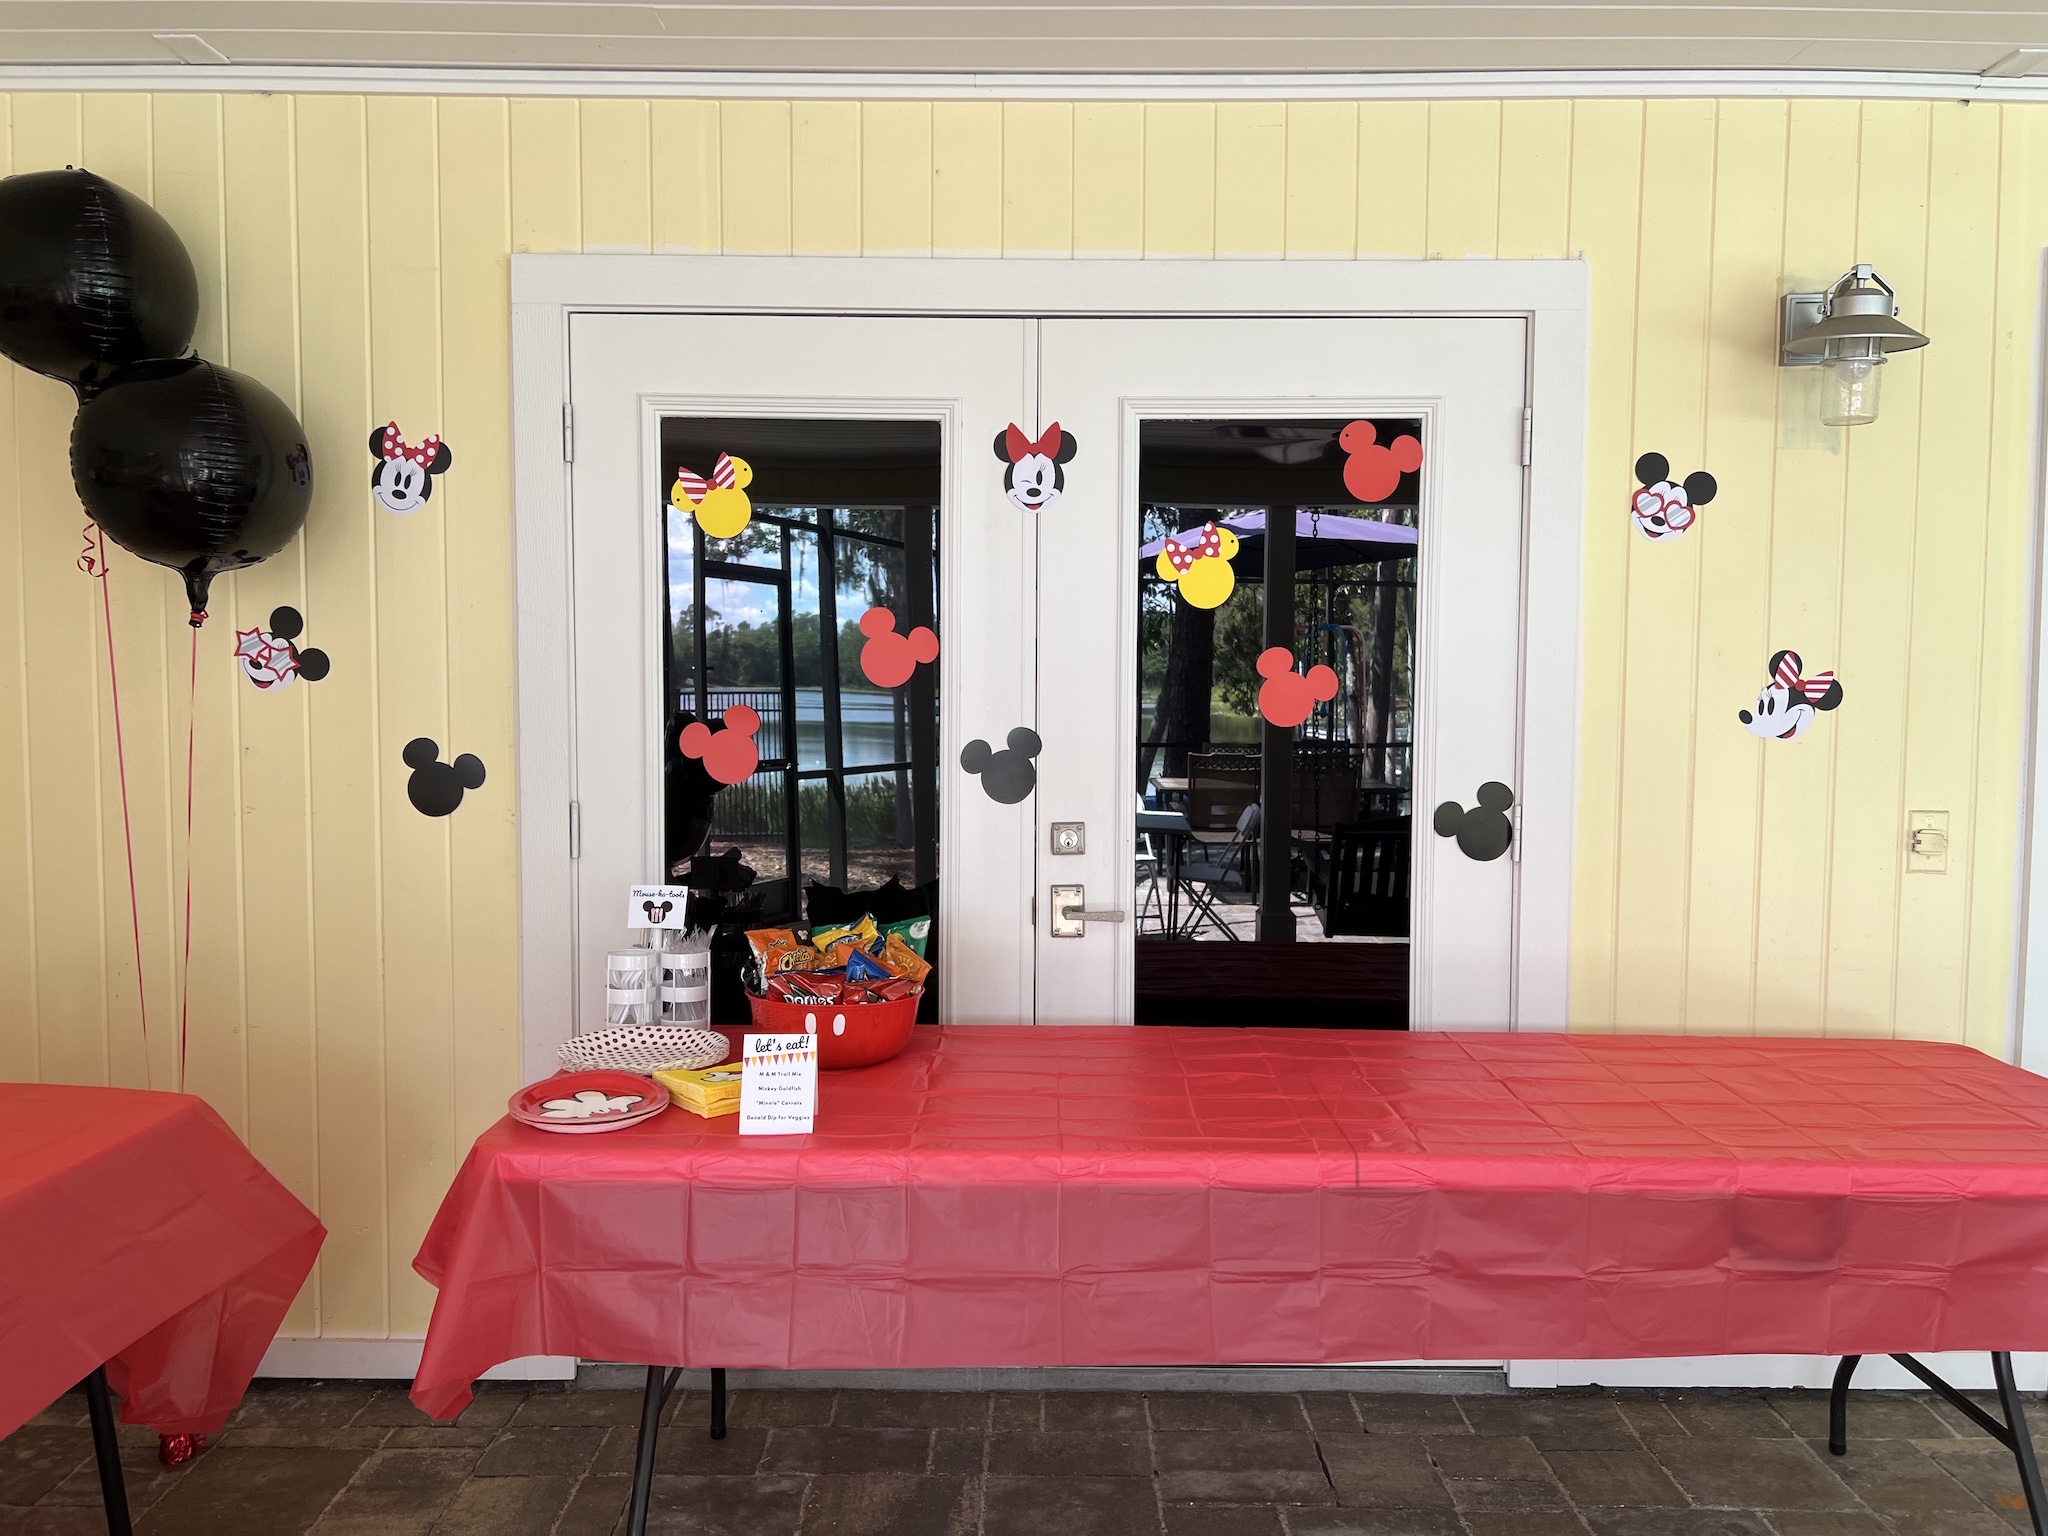 Simple wall party decor at Pepper's Magical "Mickey & Minnie Mouse" 3rd Birthday Pool Party | Creative ideas for hosting a magical Mickey & Minnie themed birthday bash for your little Mouseketeer with do-able decor, punny snacks, and party games that are fun for all ages! via thinkingcloset.com